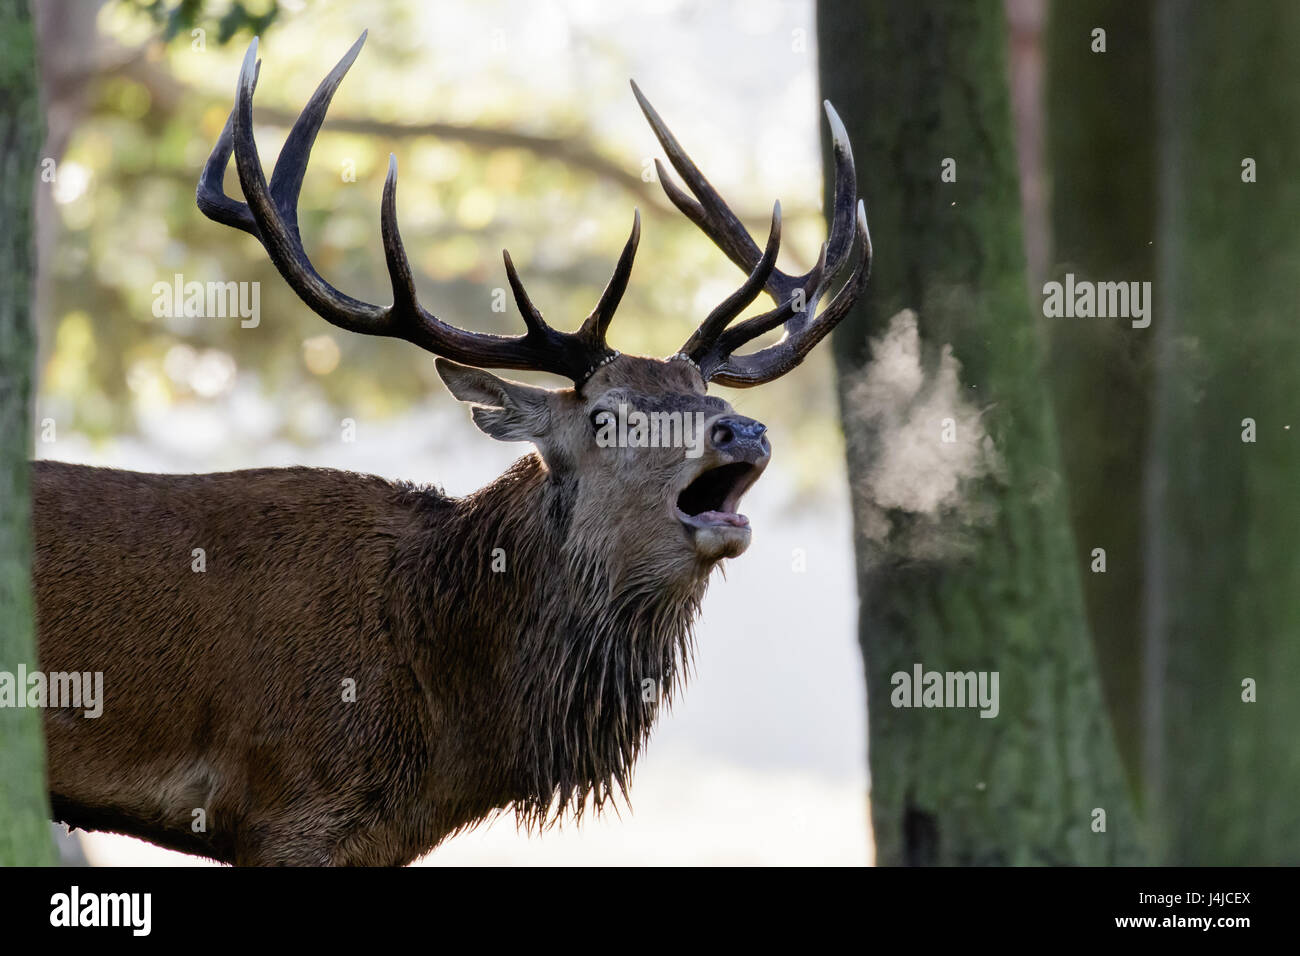 Red Deer stag (Cervus elaphus) roaring or calling in early morning mist, showing breath Stock Photo